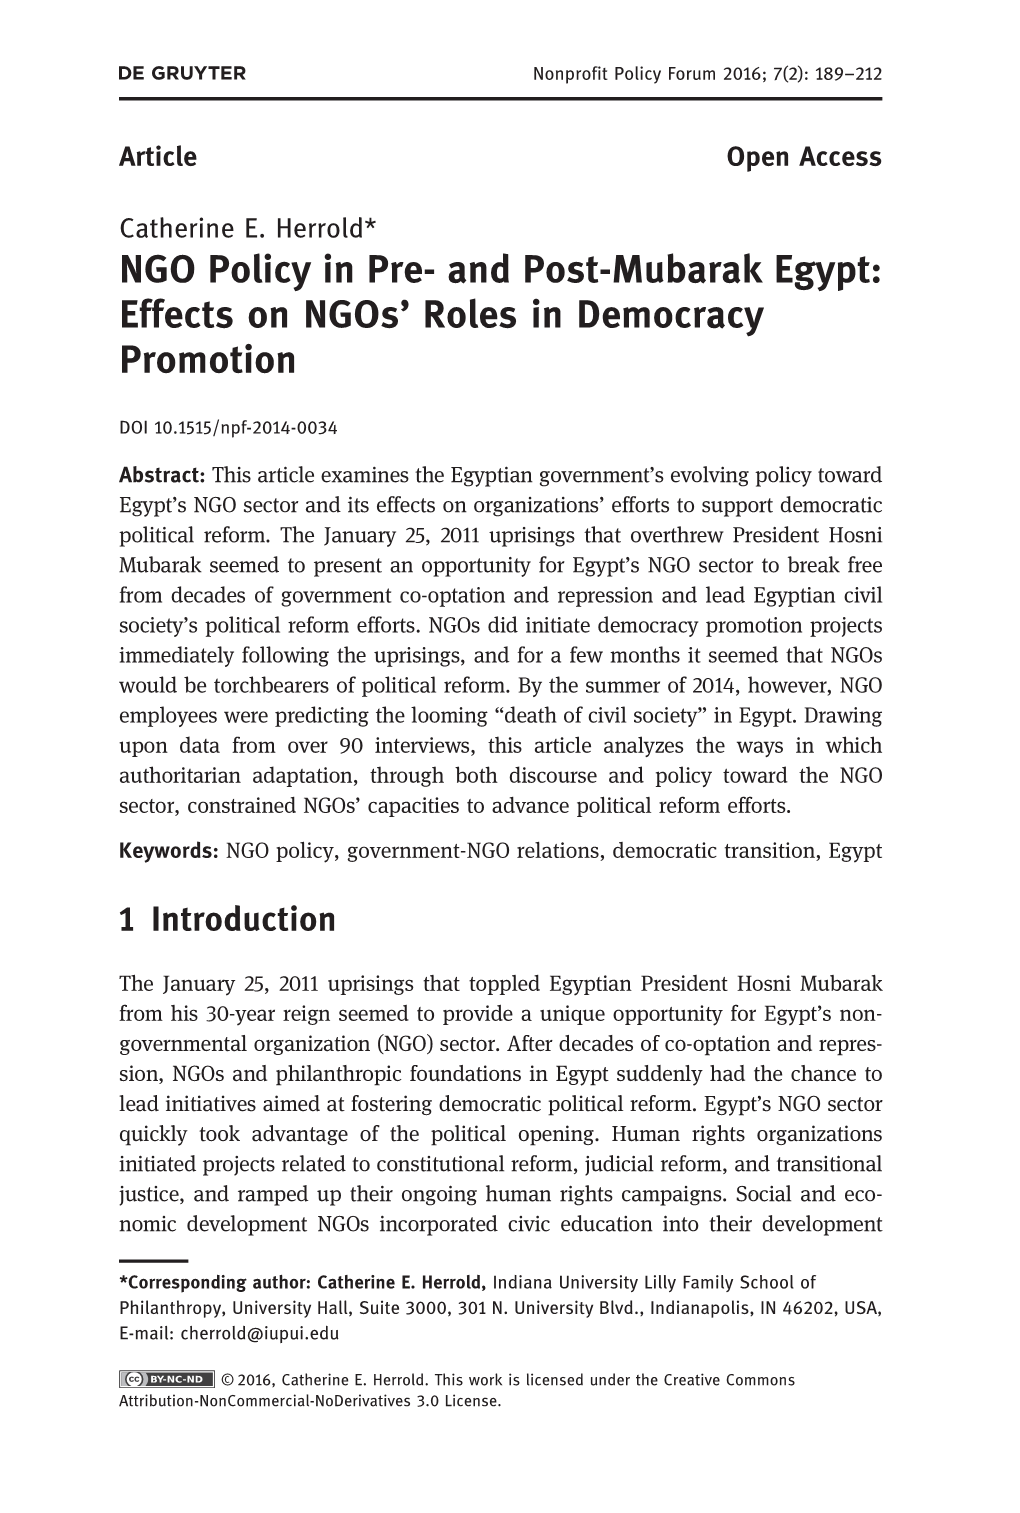 NGO Policy in Pre-And Post-Mubarak Egypt: Effects on Ngos' Roles In